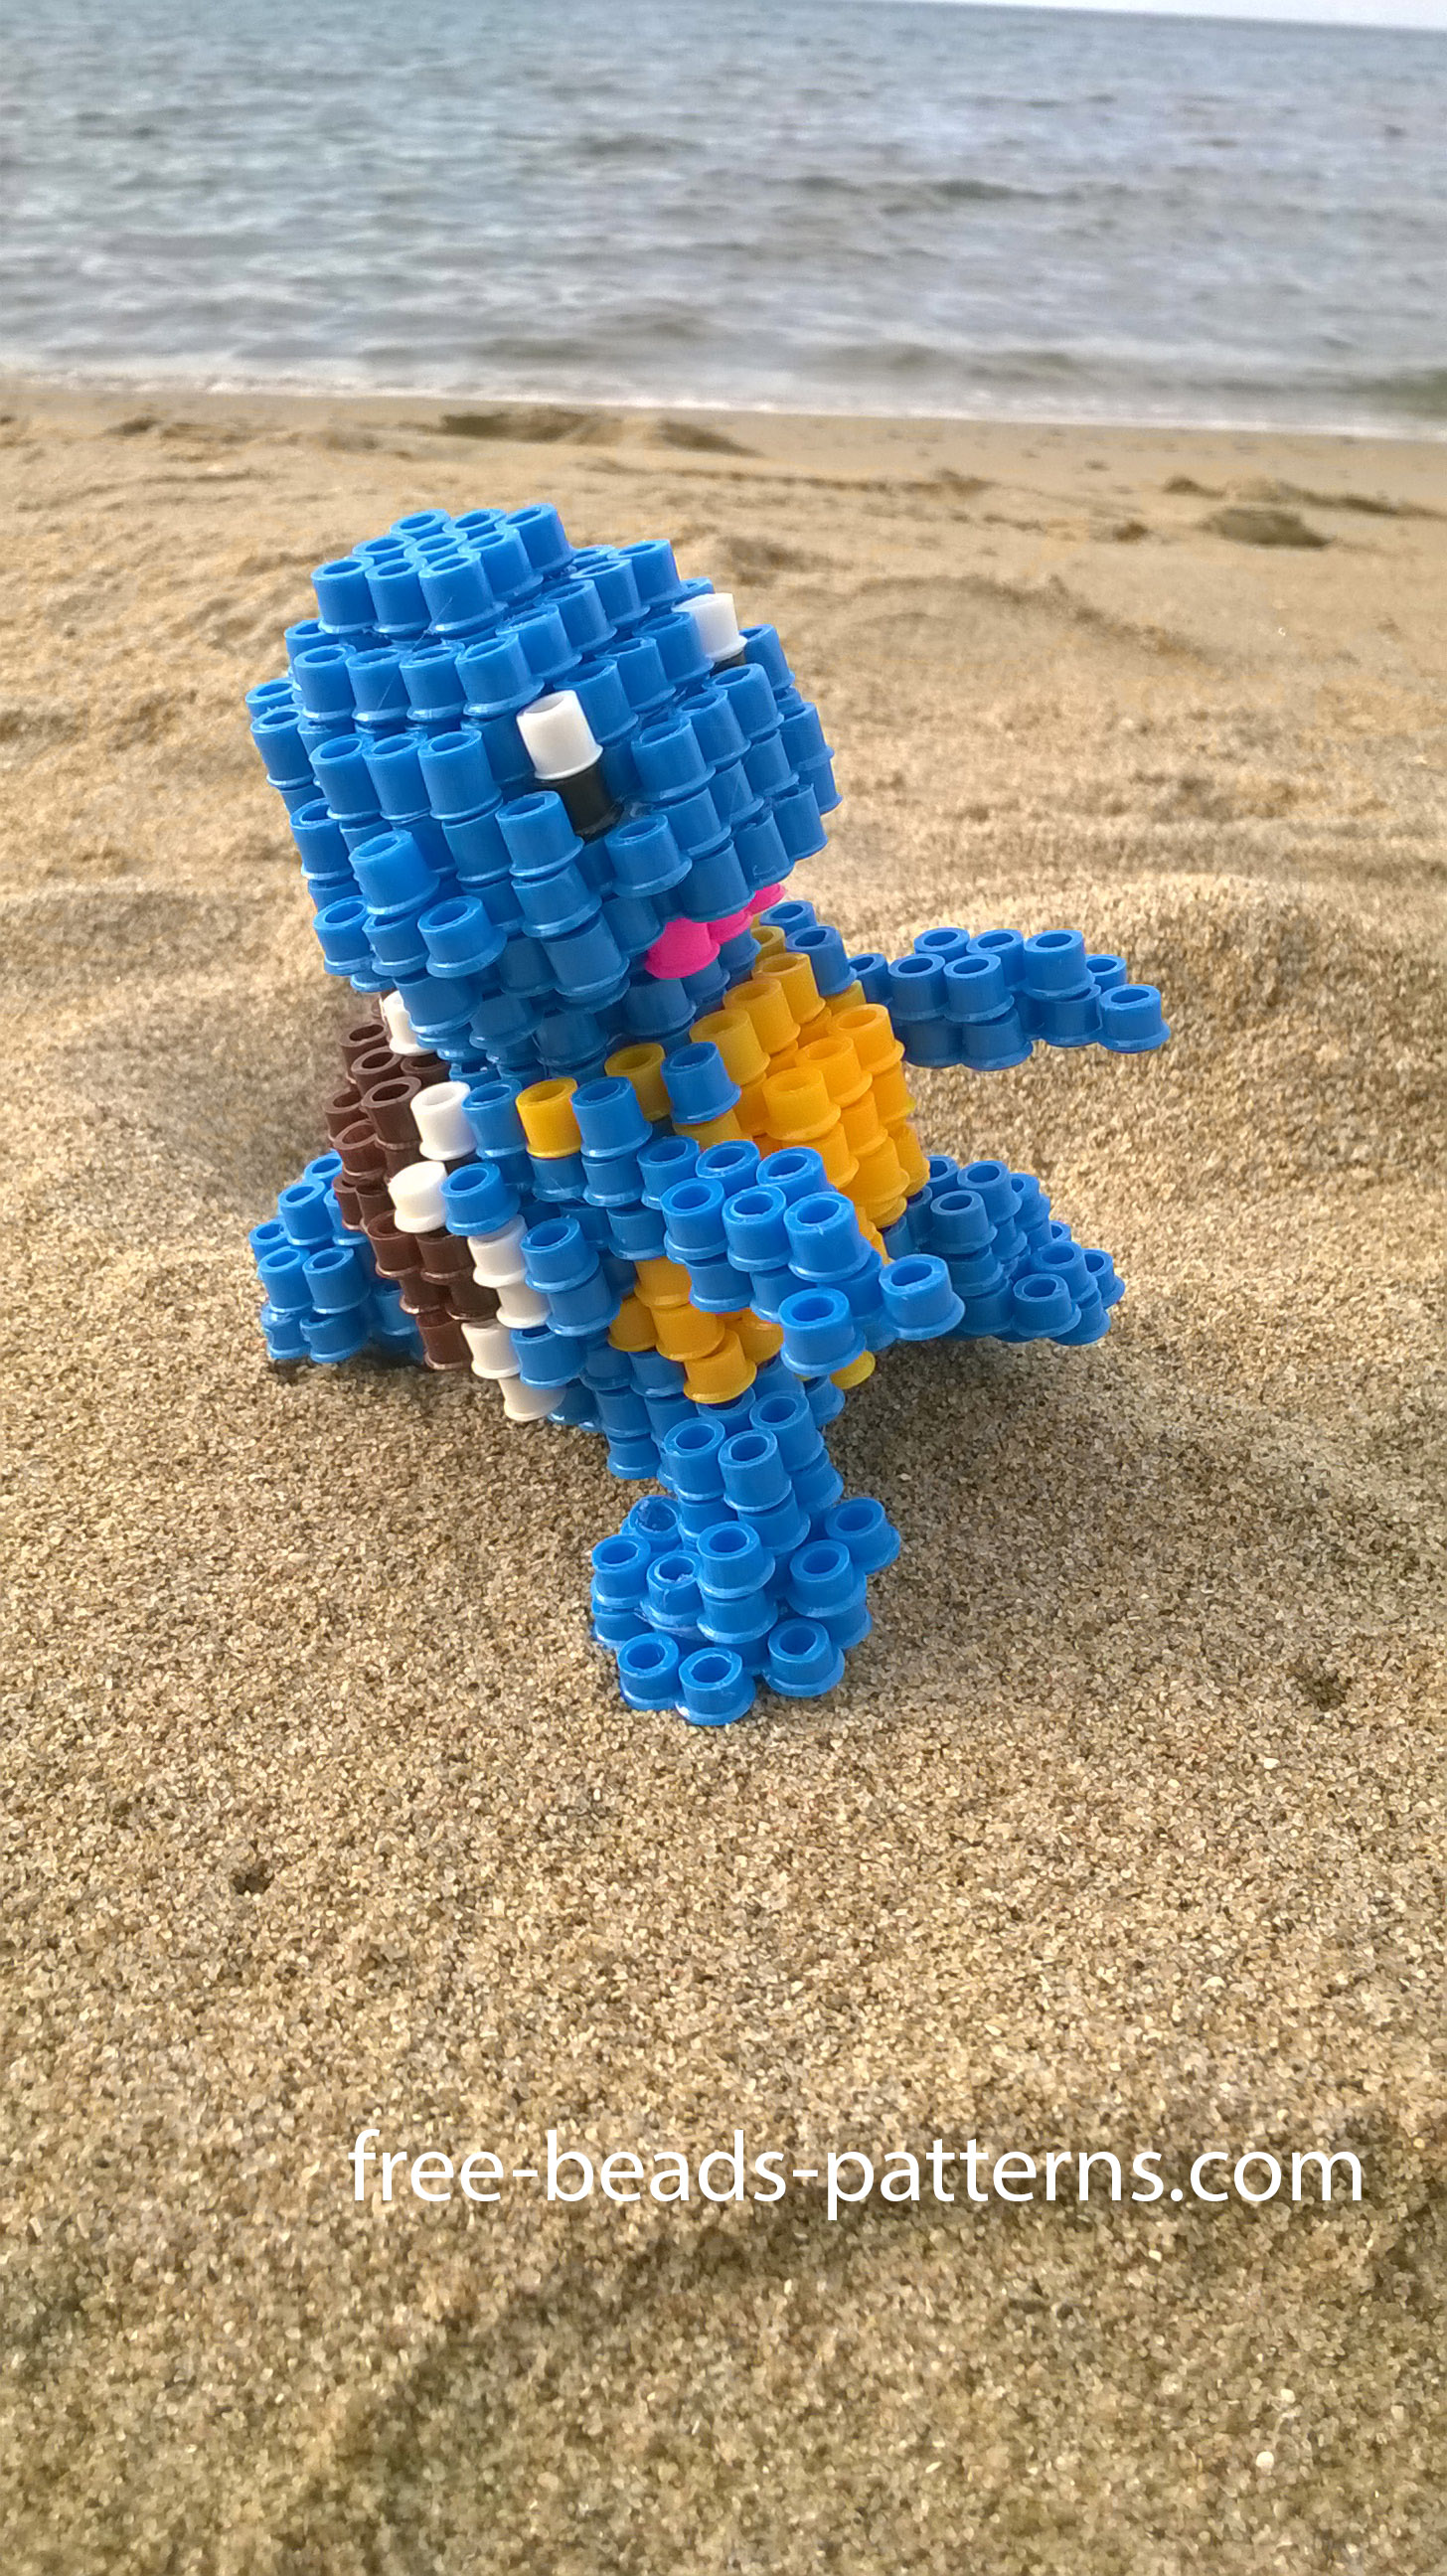 Squirtle Pokemon 3D Perler Beads Hama Beads at the beach photos (4)